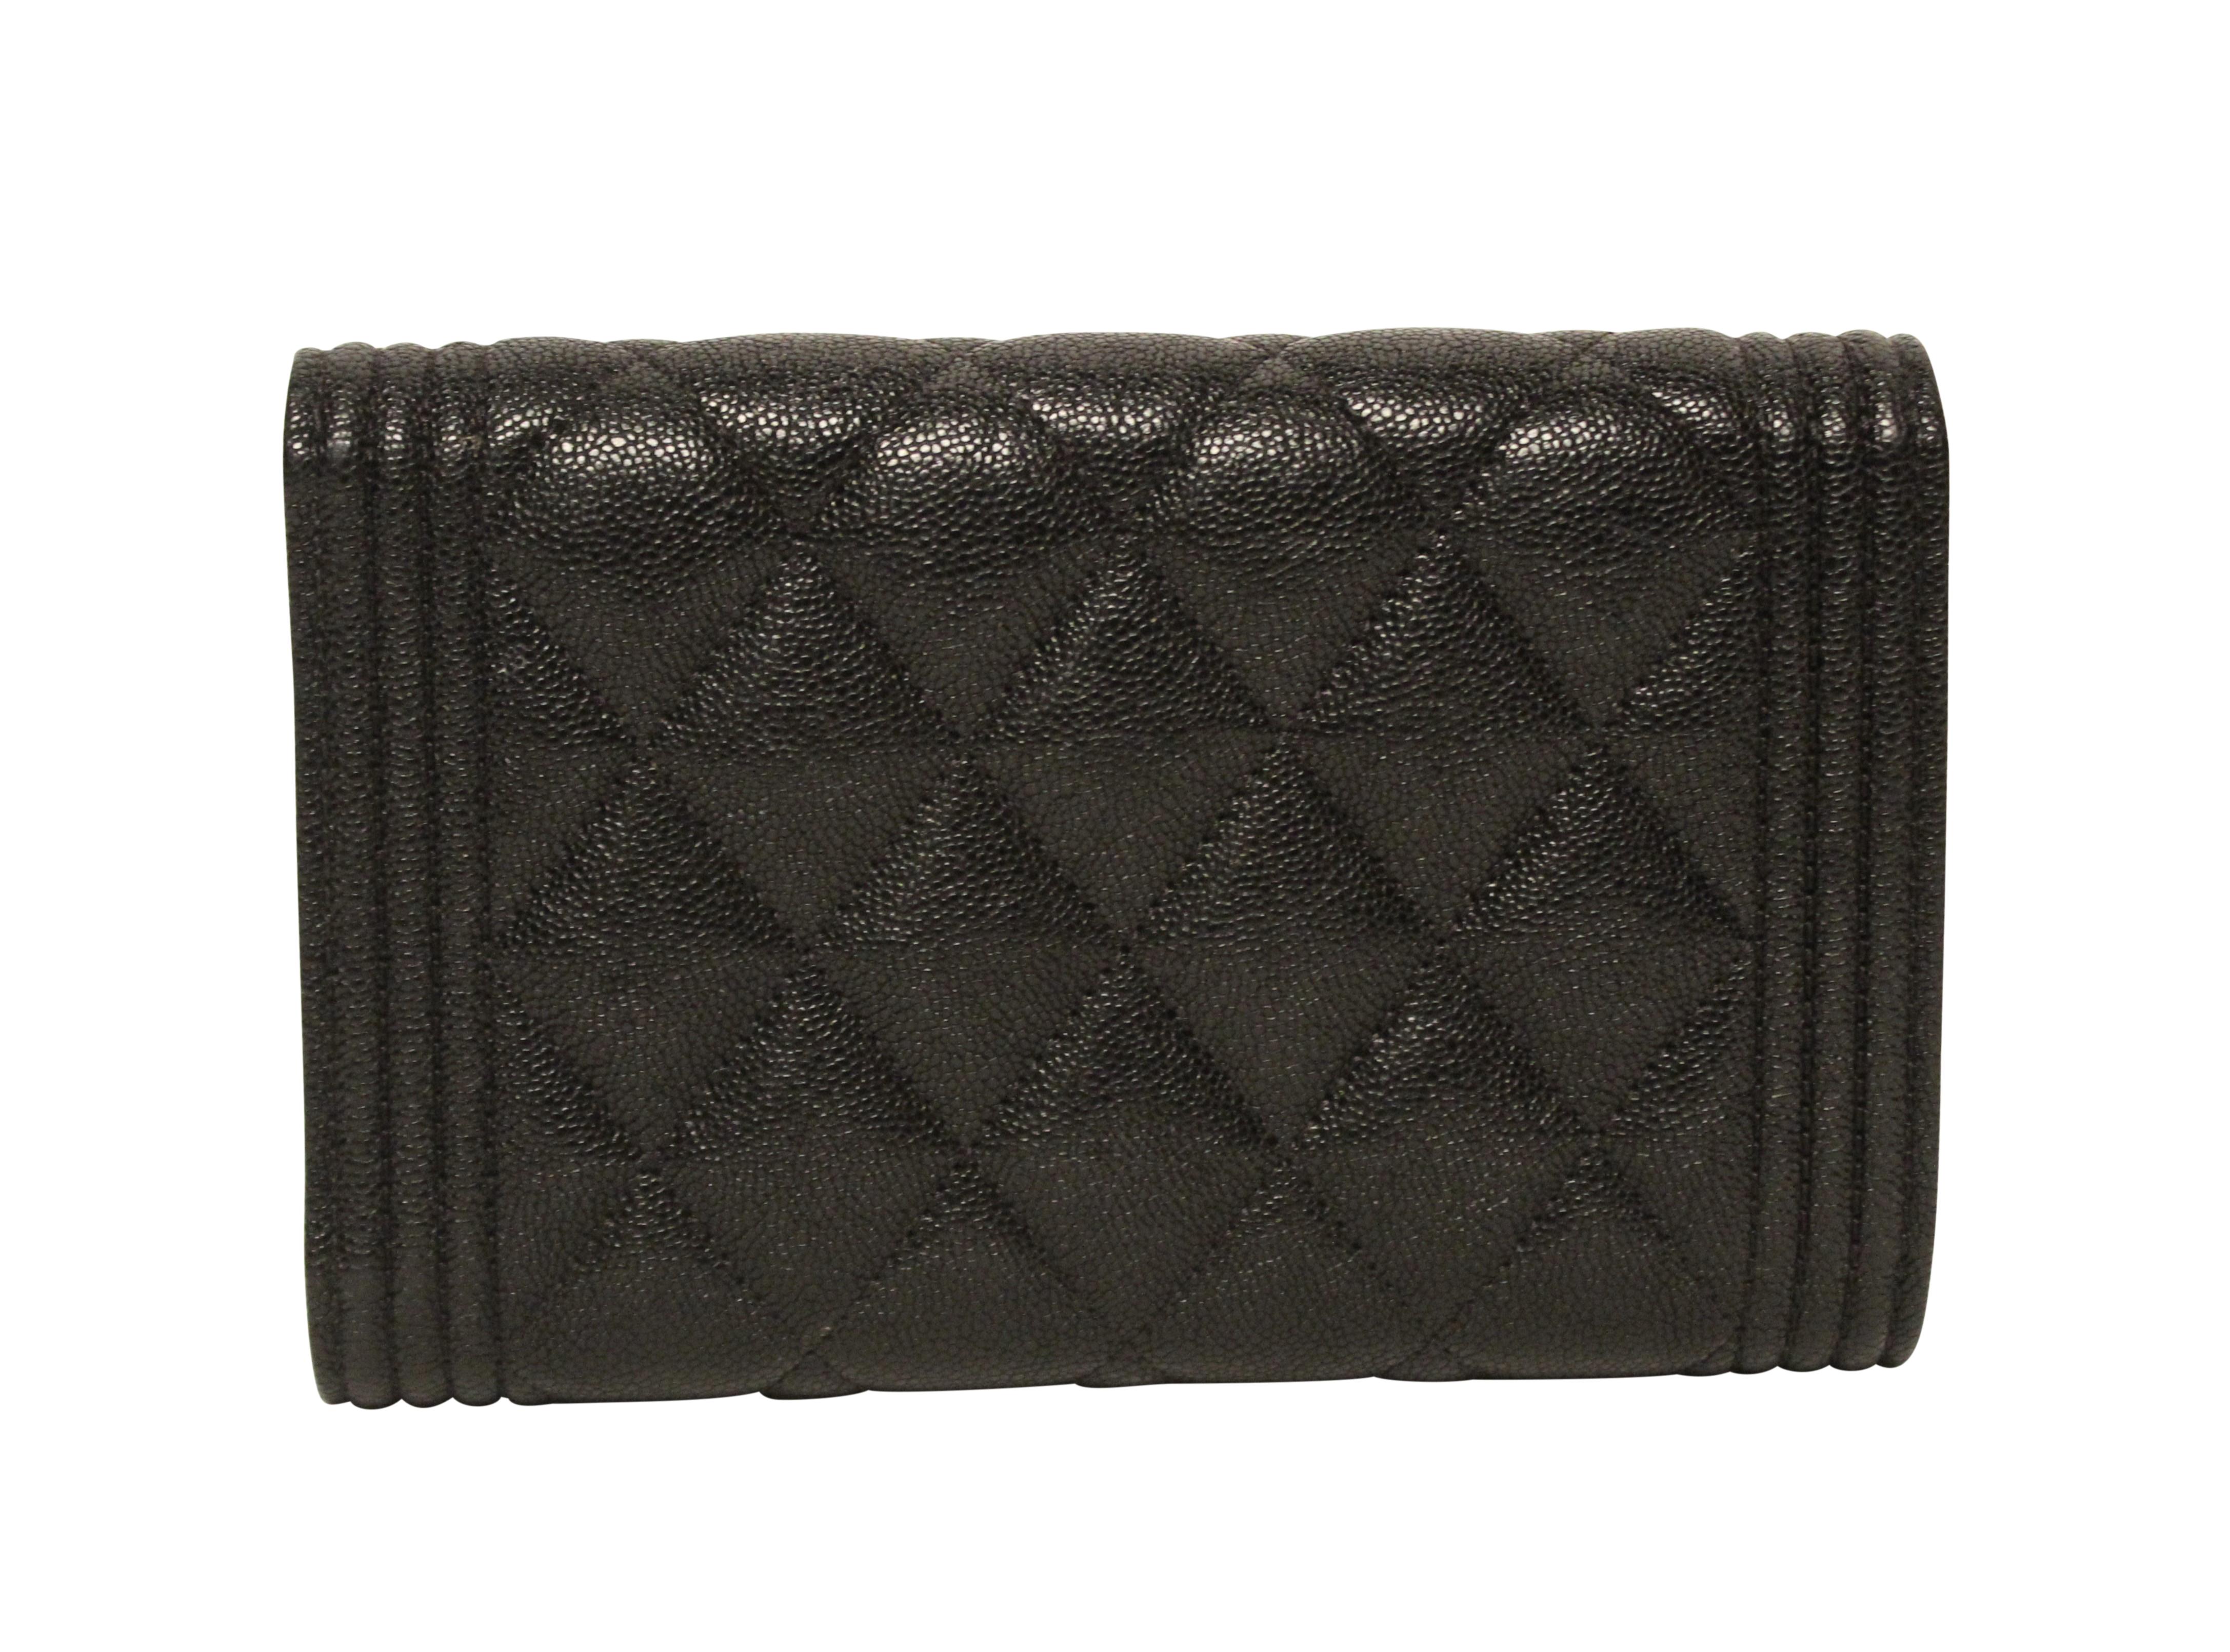 Pristine CHANEL medium Boy Flap wallet in grained calfskin, and soft gold toned metal hardware. This wallet features iconic Boy Bag style linear border, iconic CHANEL quilting, interior zip pocket, notes comparment and idividual card slots.